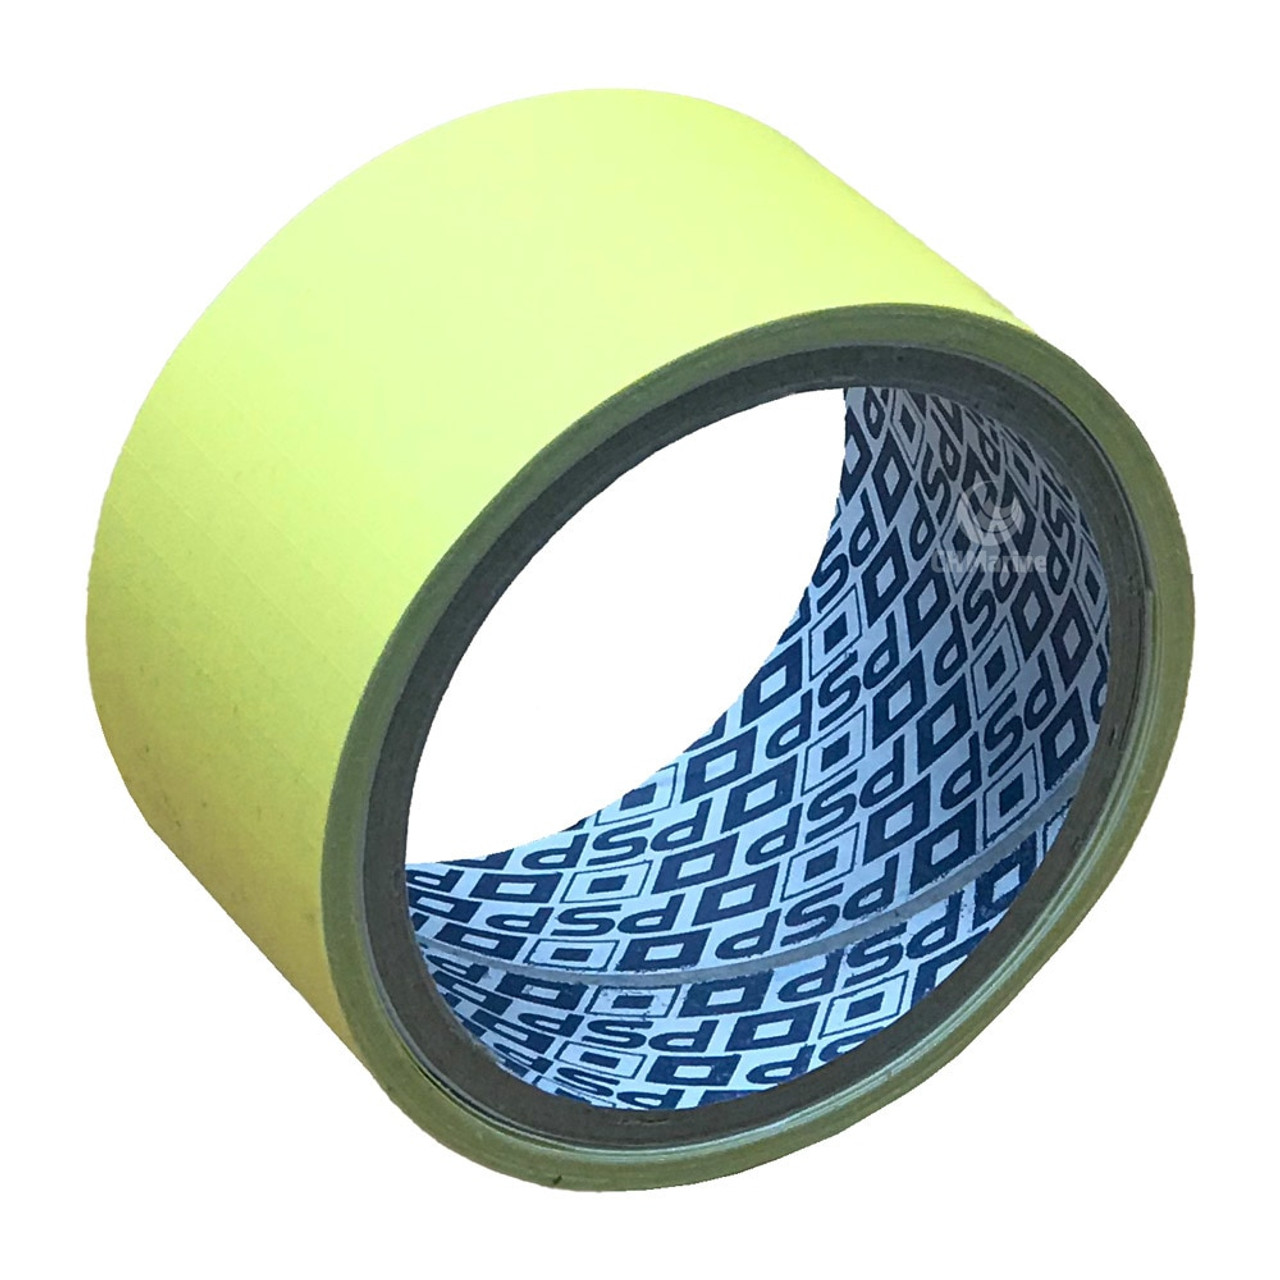 PSP Spinnaker Repair Tape - Known for a fast effective repair